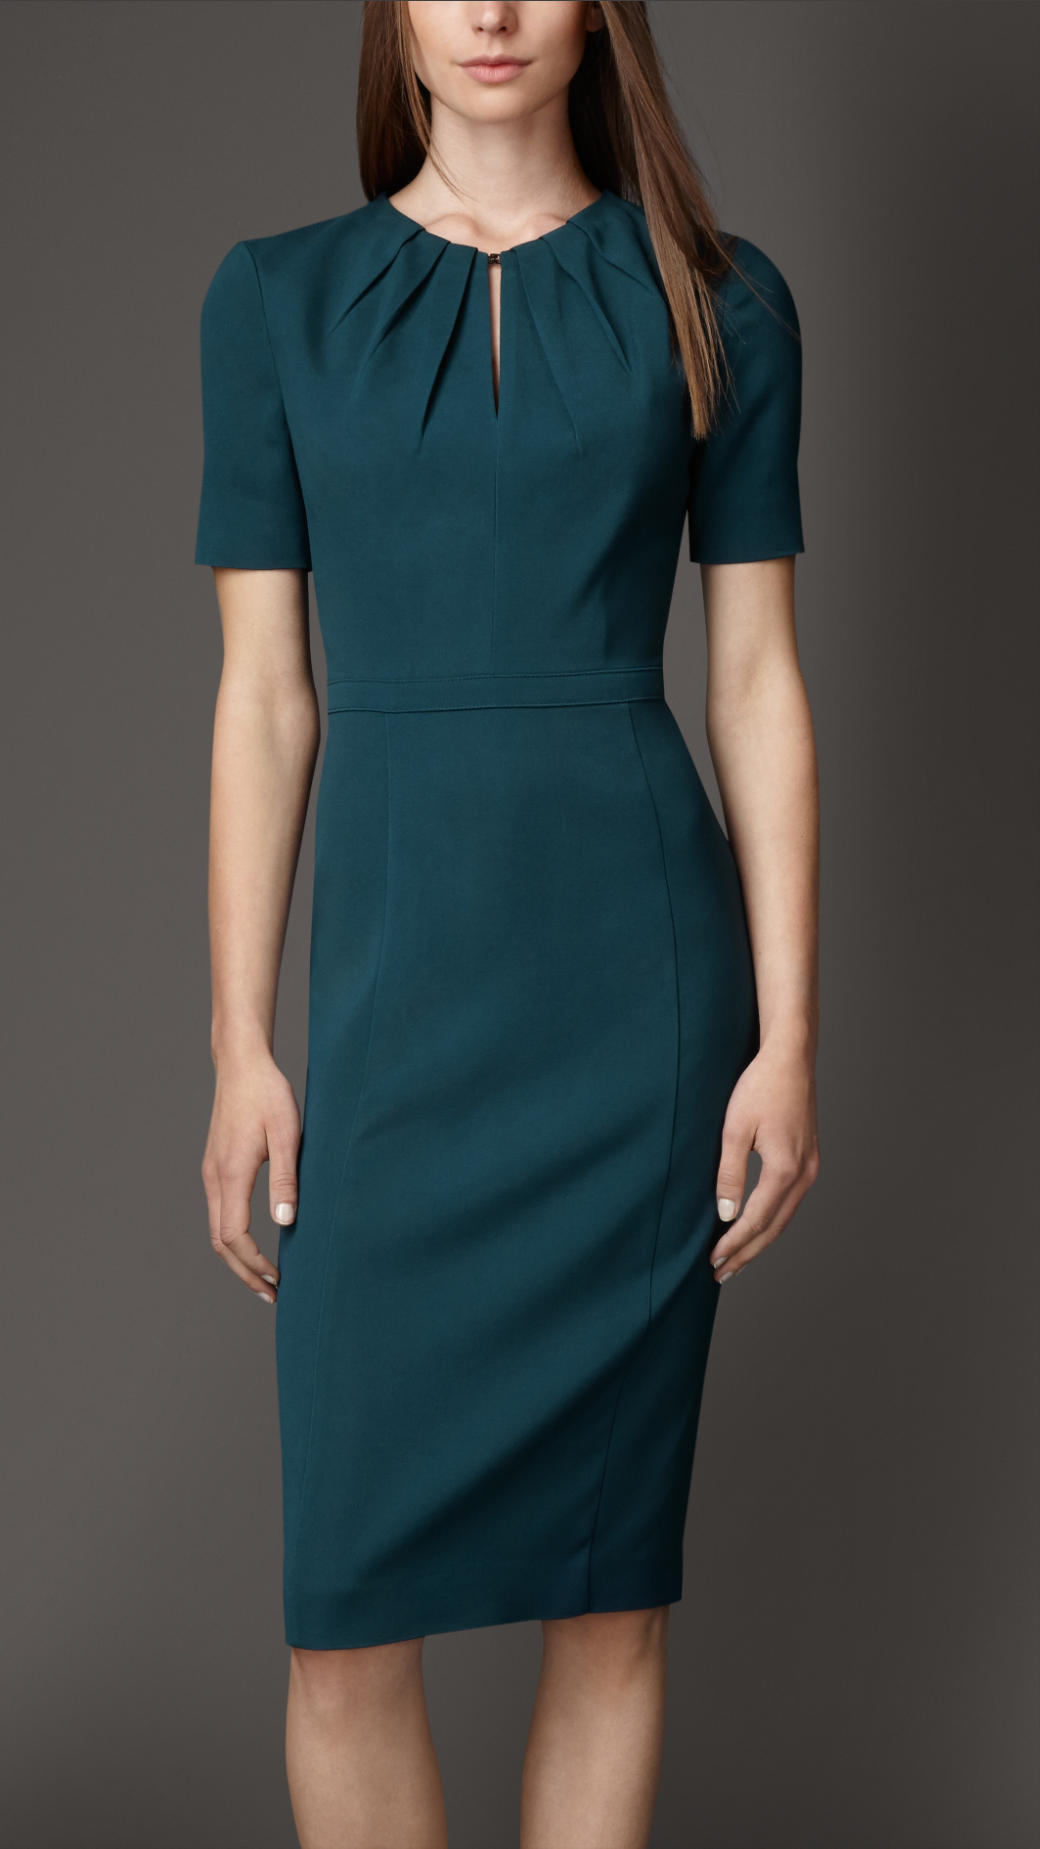 Burberry Pleat Neck Tailored Dress in Green | Lyst